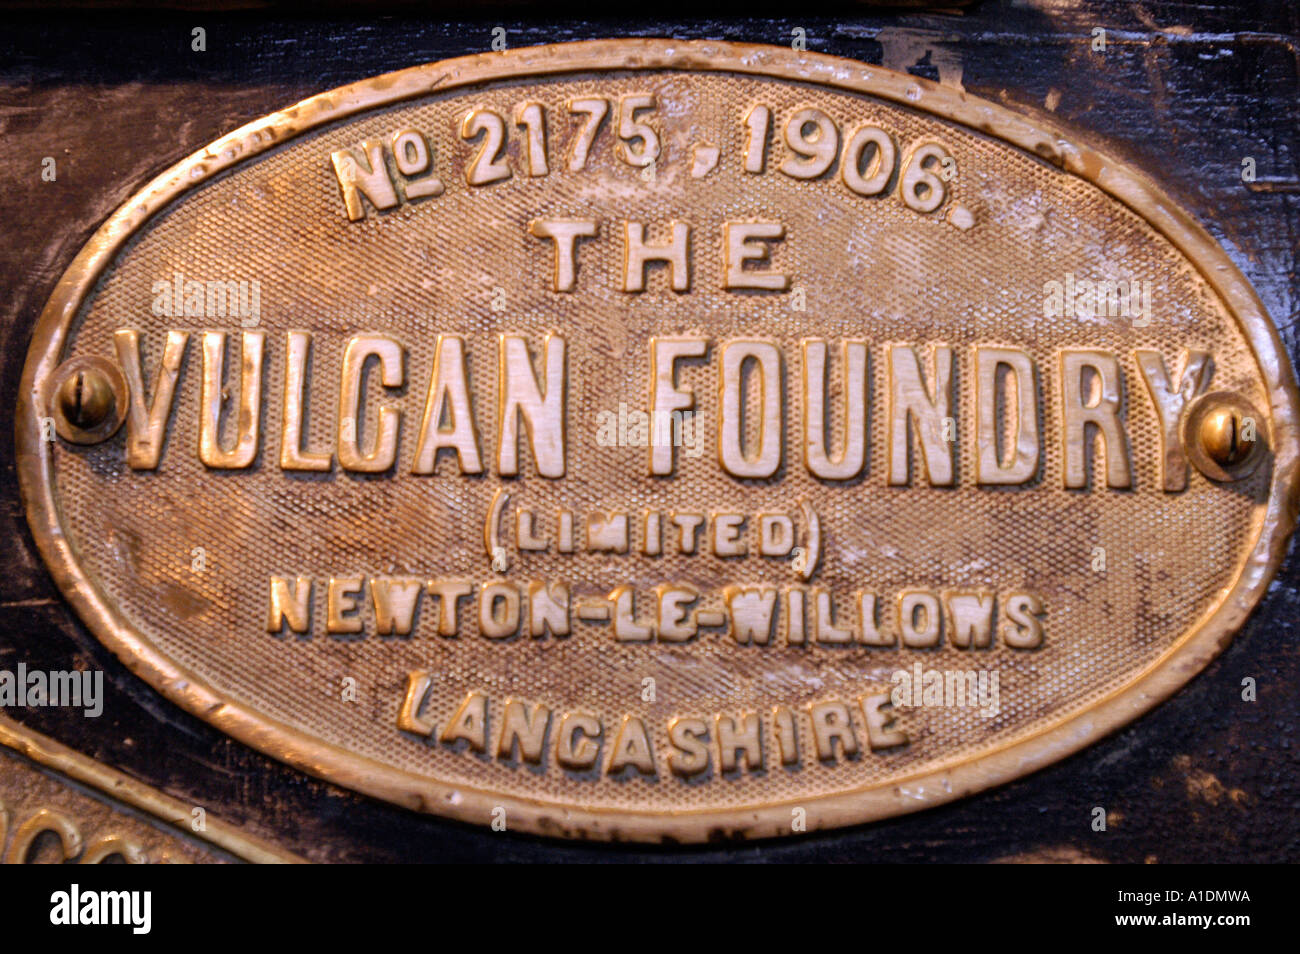 Heritage sign The Vulcan Foundry Ltd Newton Le Willows Lancashire Stock Photo